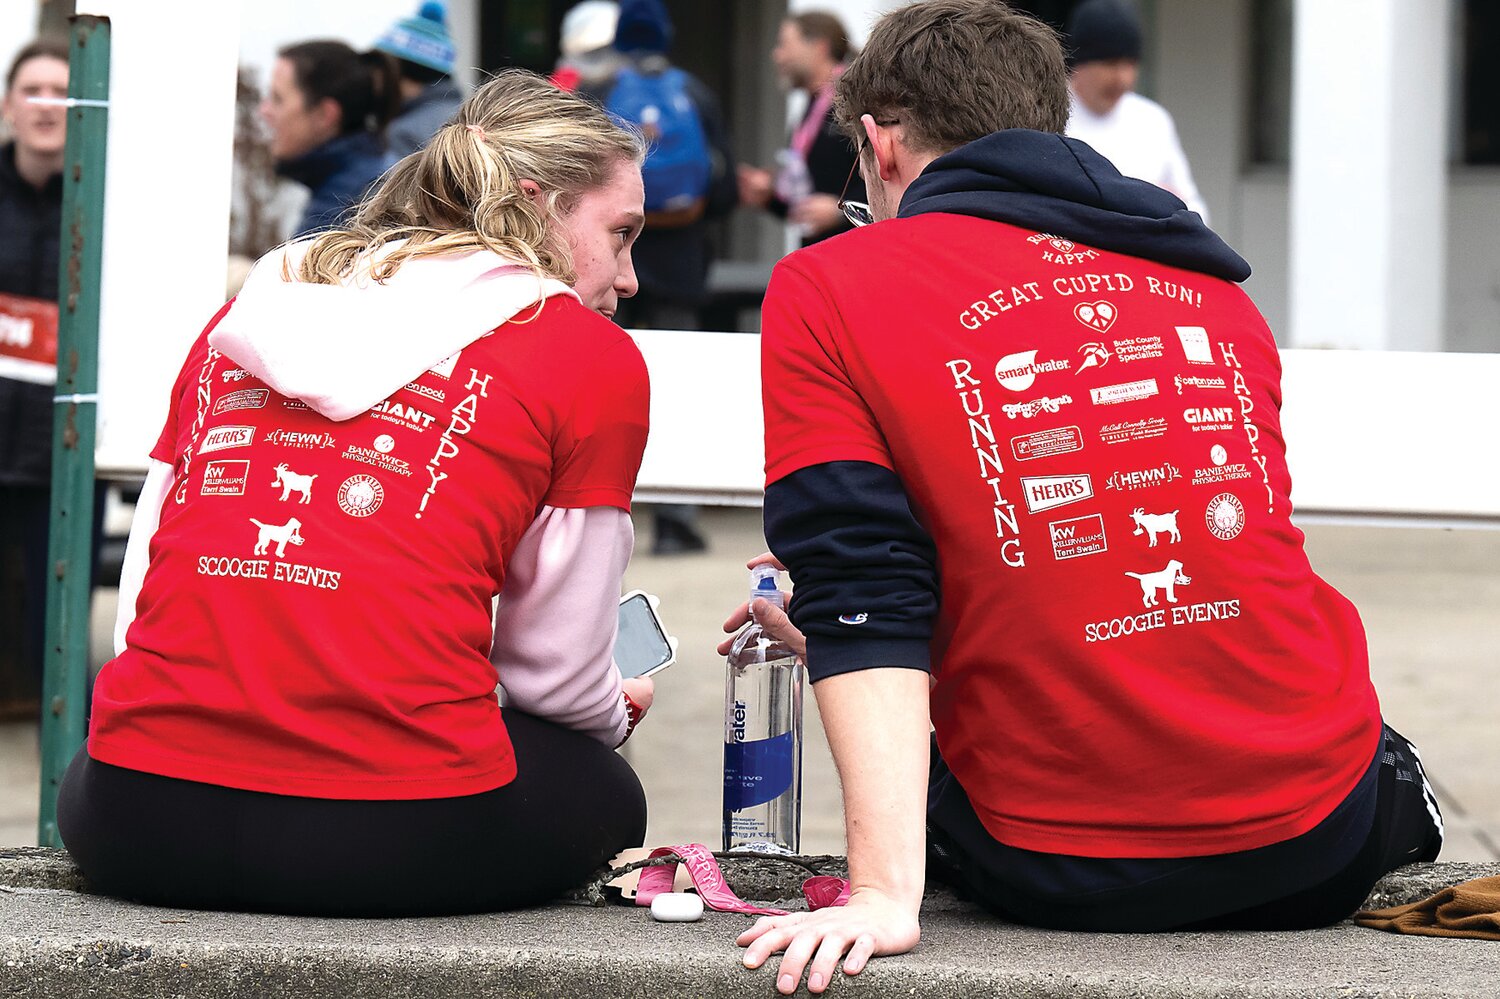 Two participants relax as they watch families gather to take part in the Great Cupid Run.